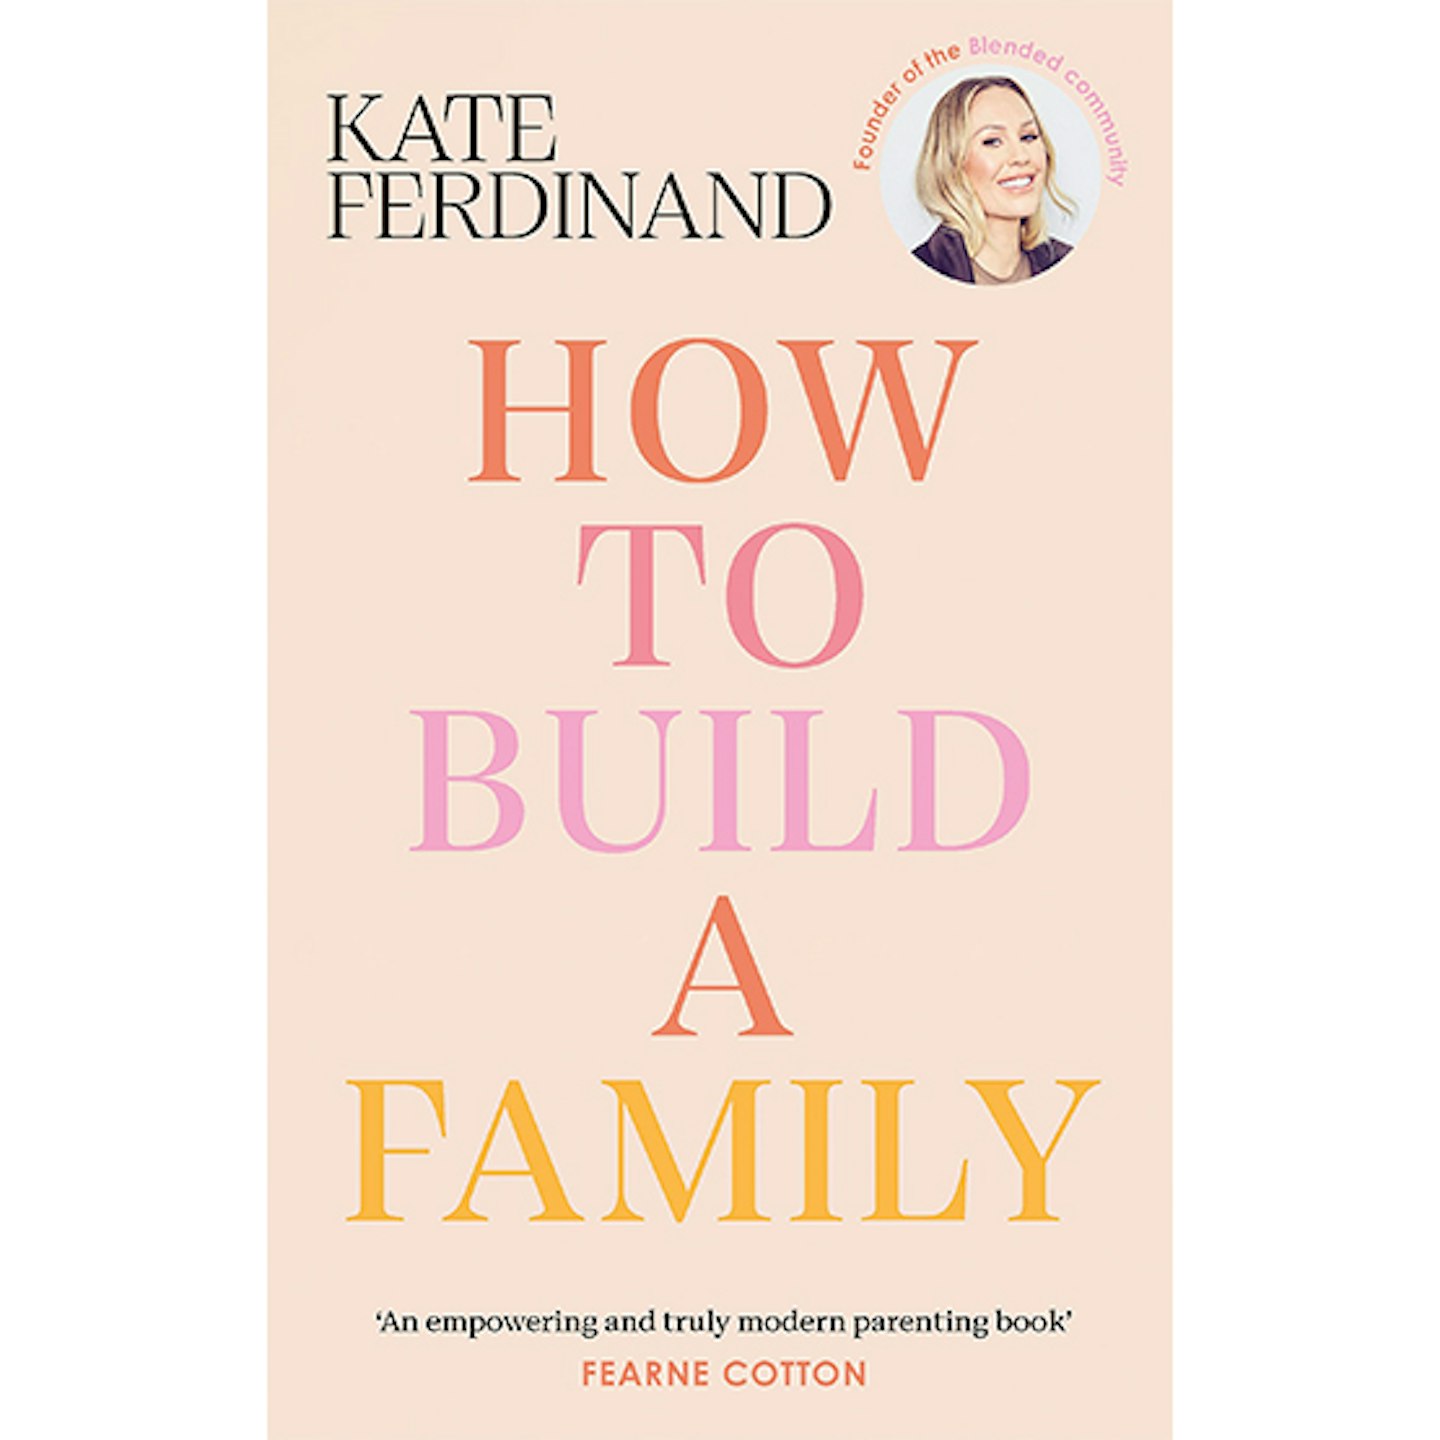 How to build a family